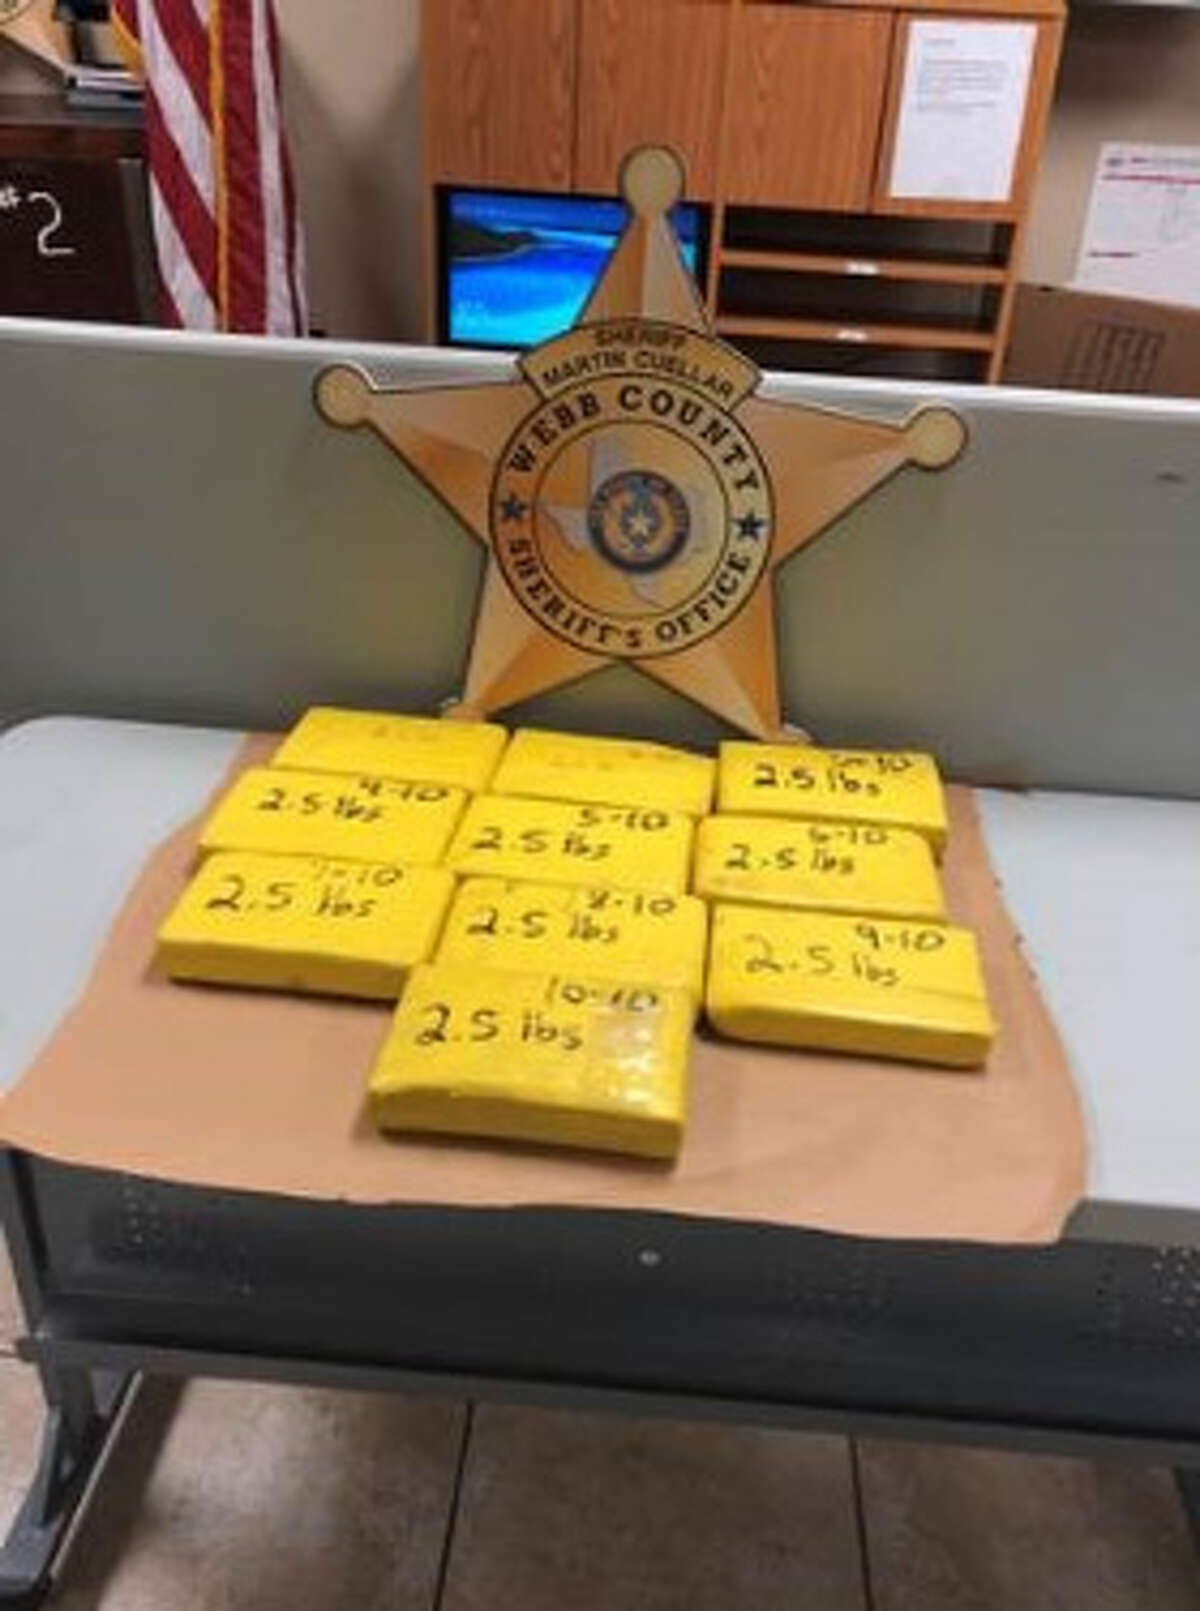 Shown are the the 10 bundles of cocaine that had a total weight of 11.3 kilos seized by Webb County Sheriff’s Office deputies.